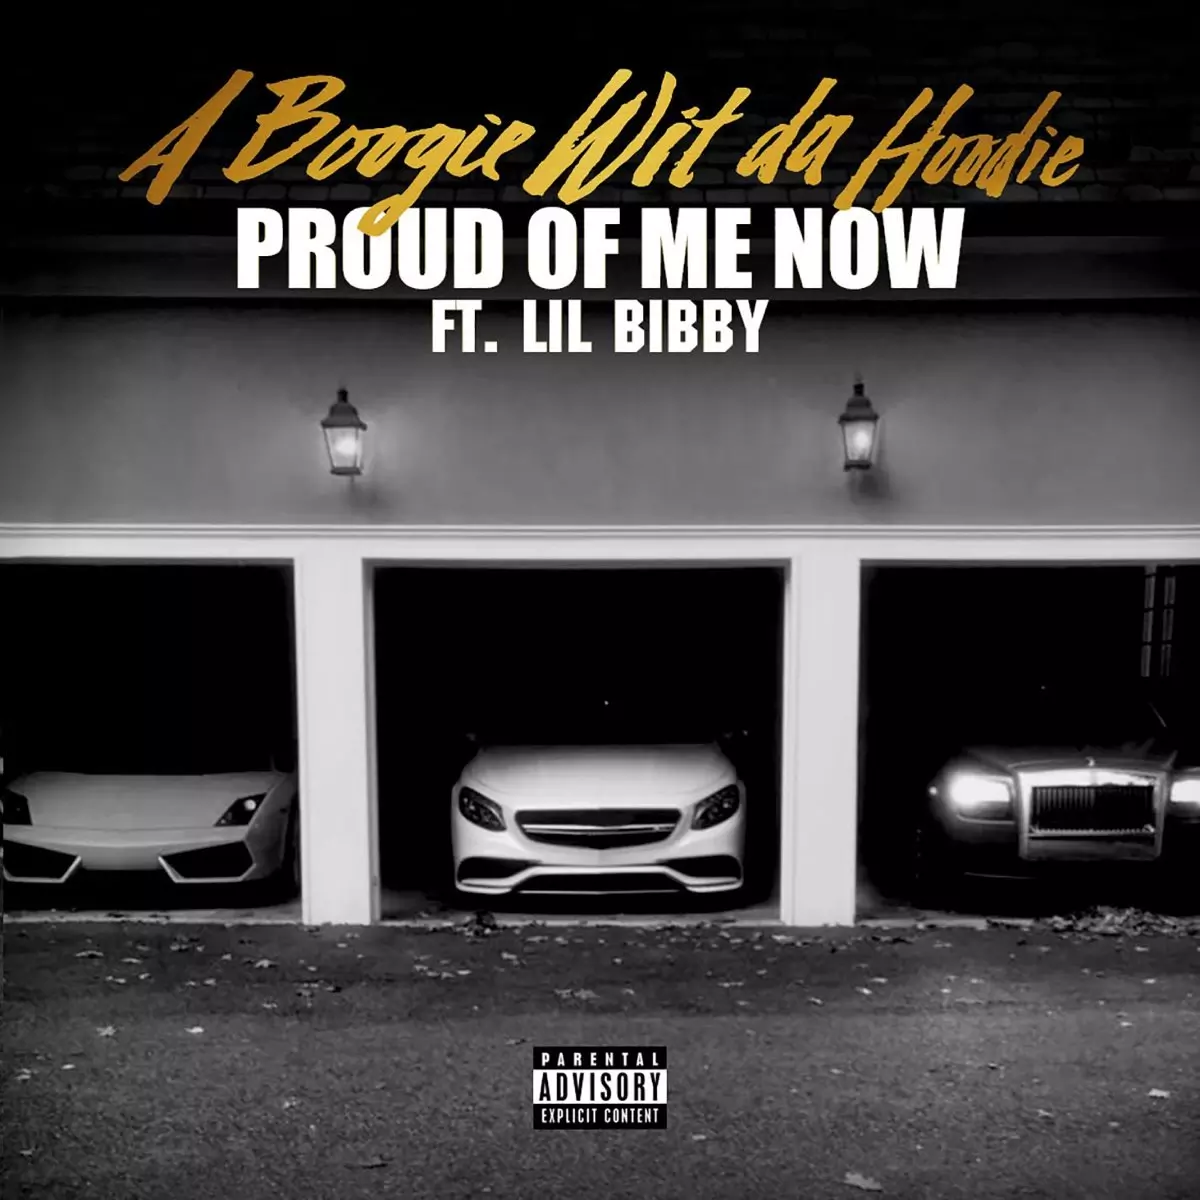 Proud of Me Now (feat. Lil Bibby) - Single by A Boogie wit da Hoodie on  Apple Music